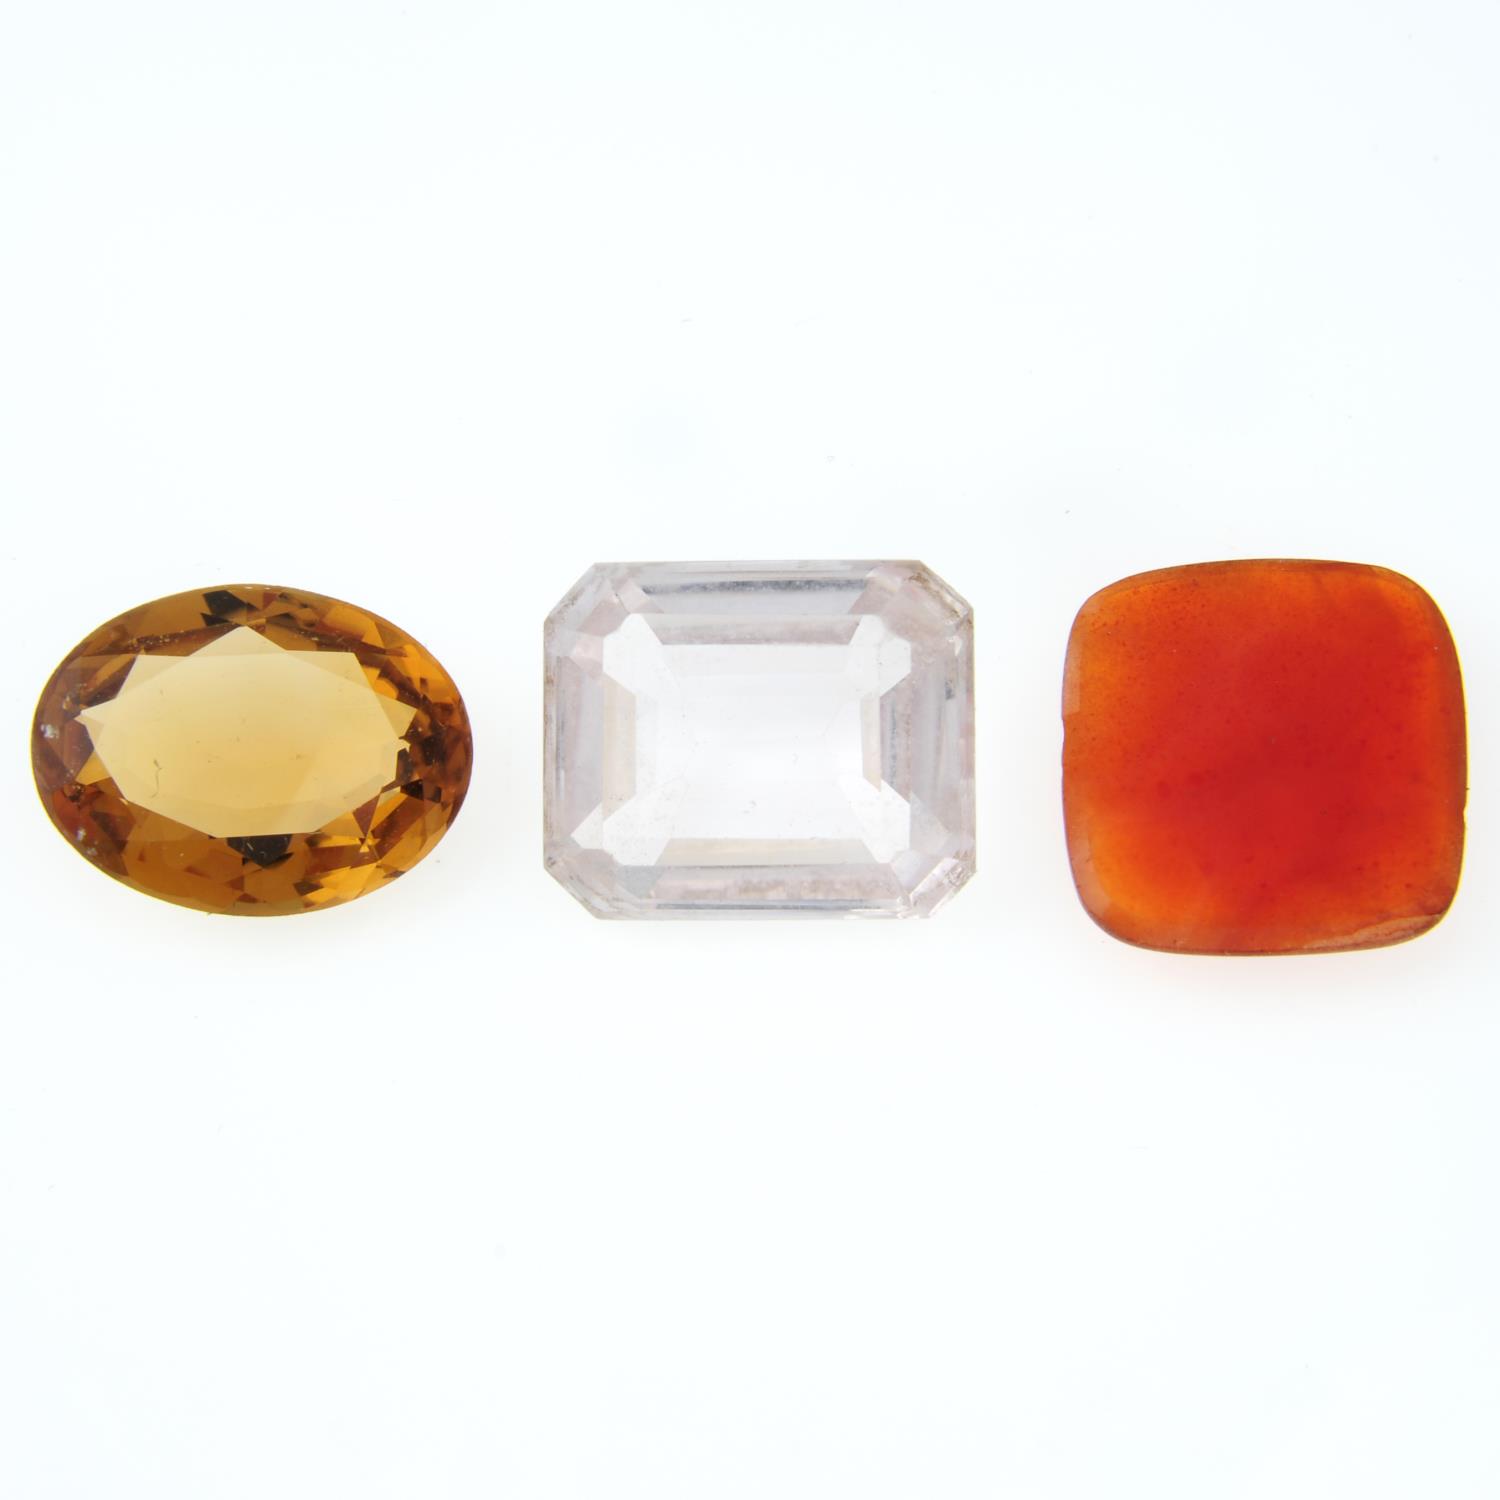 A selection of gemstones, weighing 730gms.